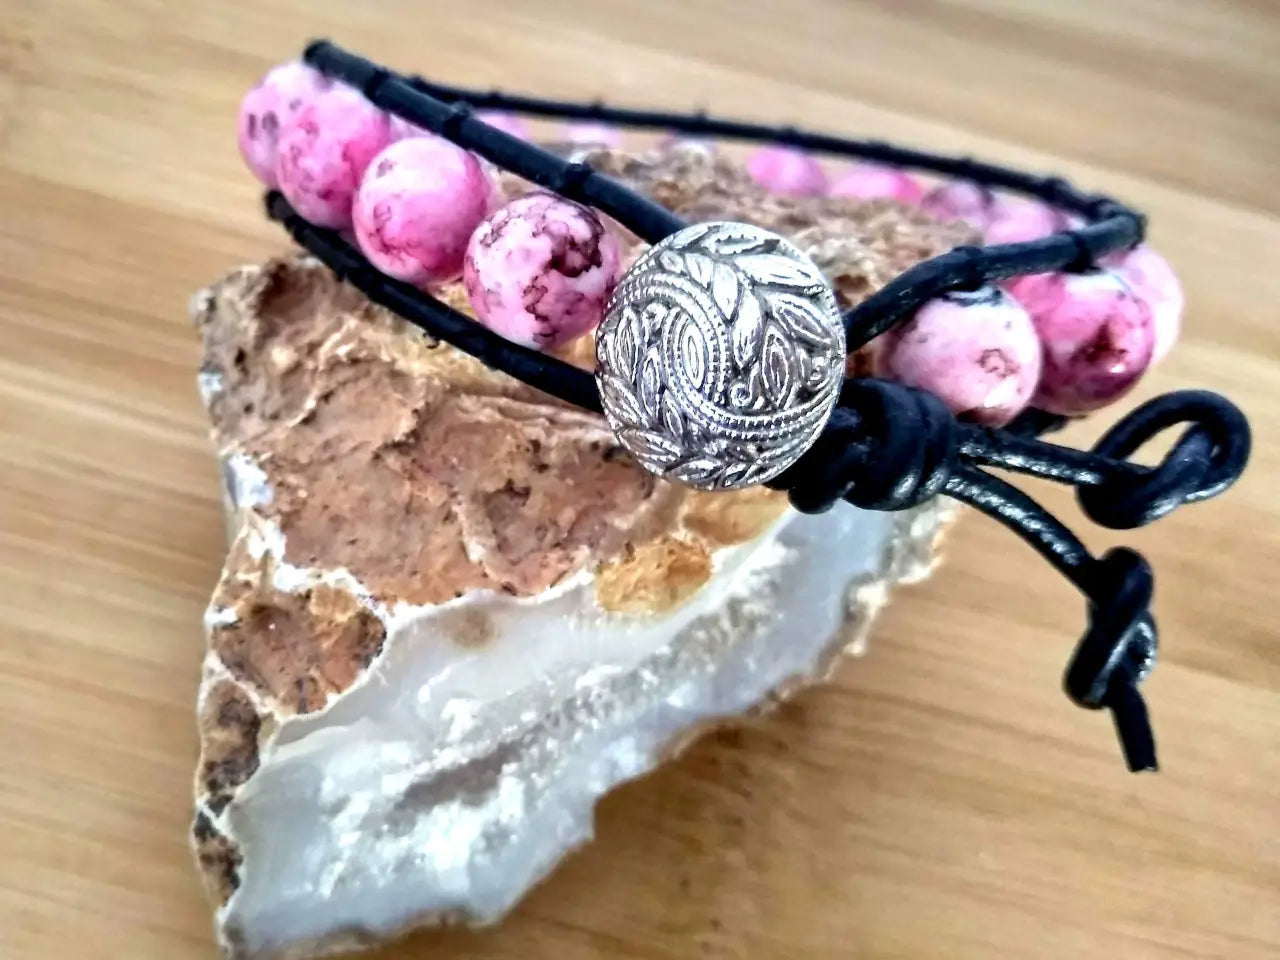 Bohemian style black leather bracelet with rhodonite beads.